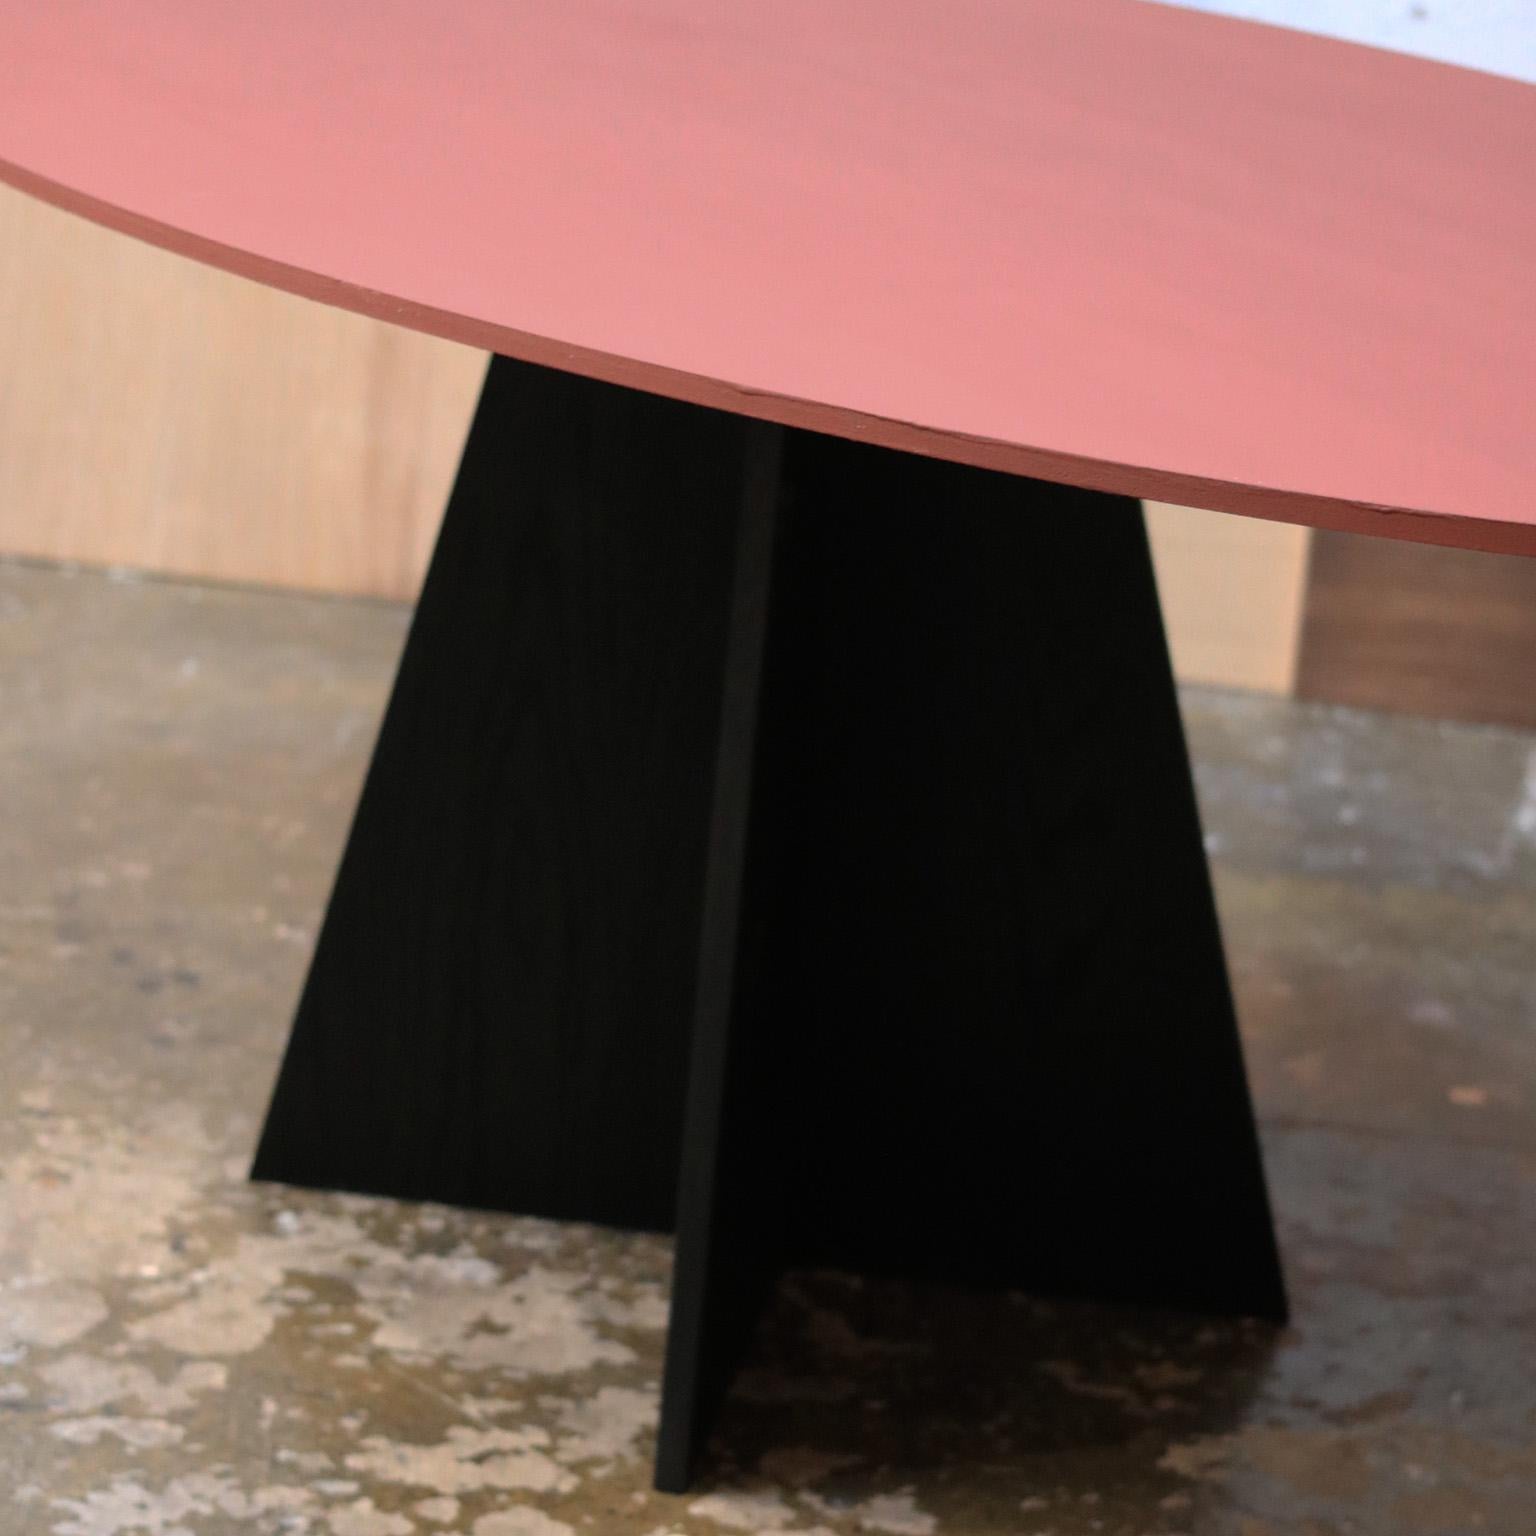 The Aether Table features a solid cherry top, painted to the customer's specifications.  The table top is shown here in 'Cardinal Red' by Pure And Original. The base is crafted from solid red oak and finished in India ink.  

This piece is entirely